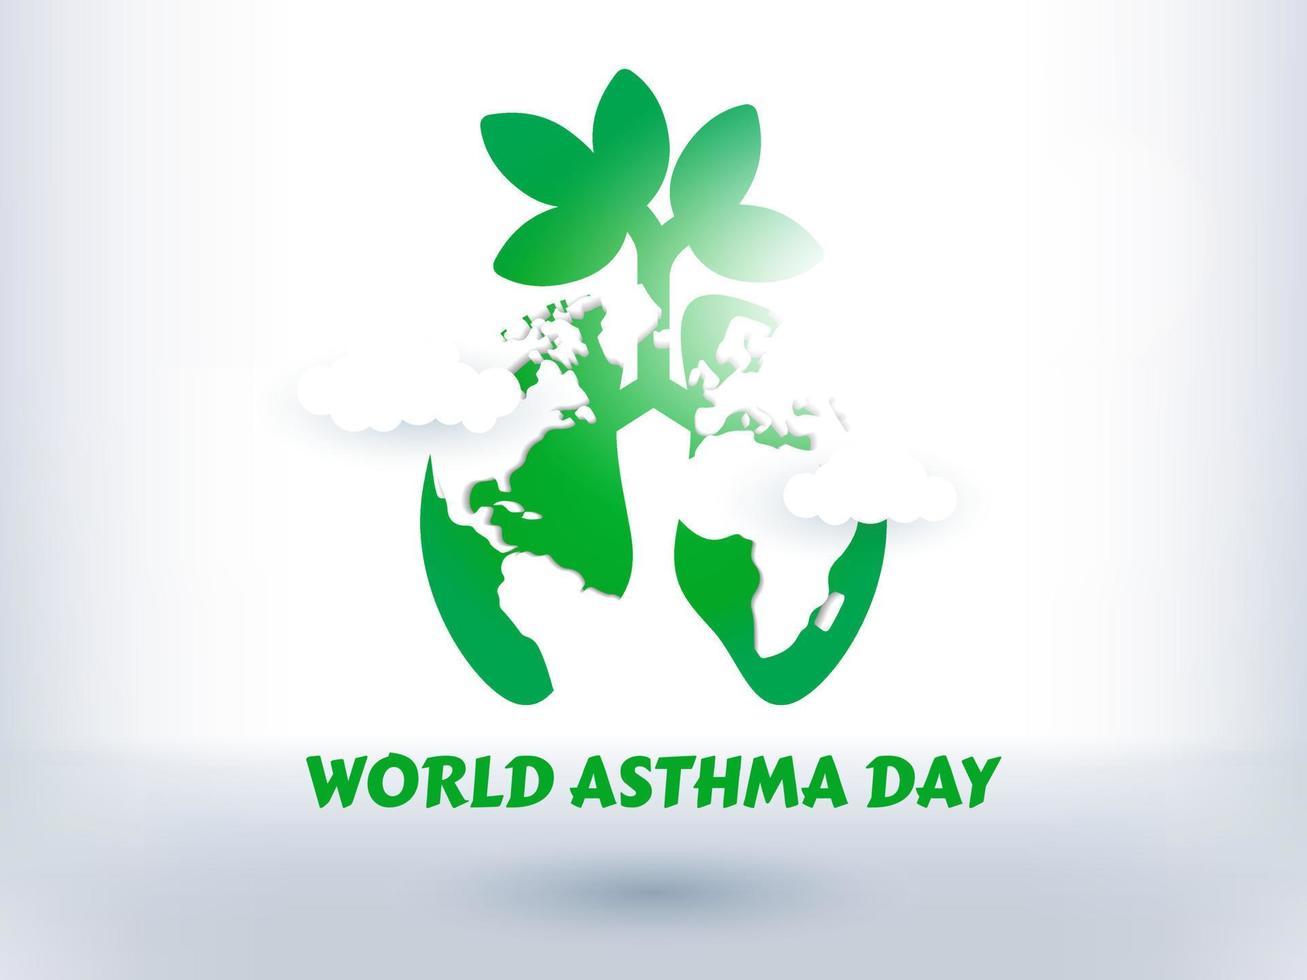 World Asthma Day Design. illustration of world, lungs, and symbolizing clean air vector